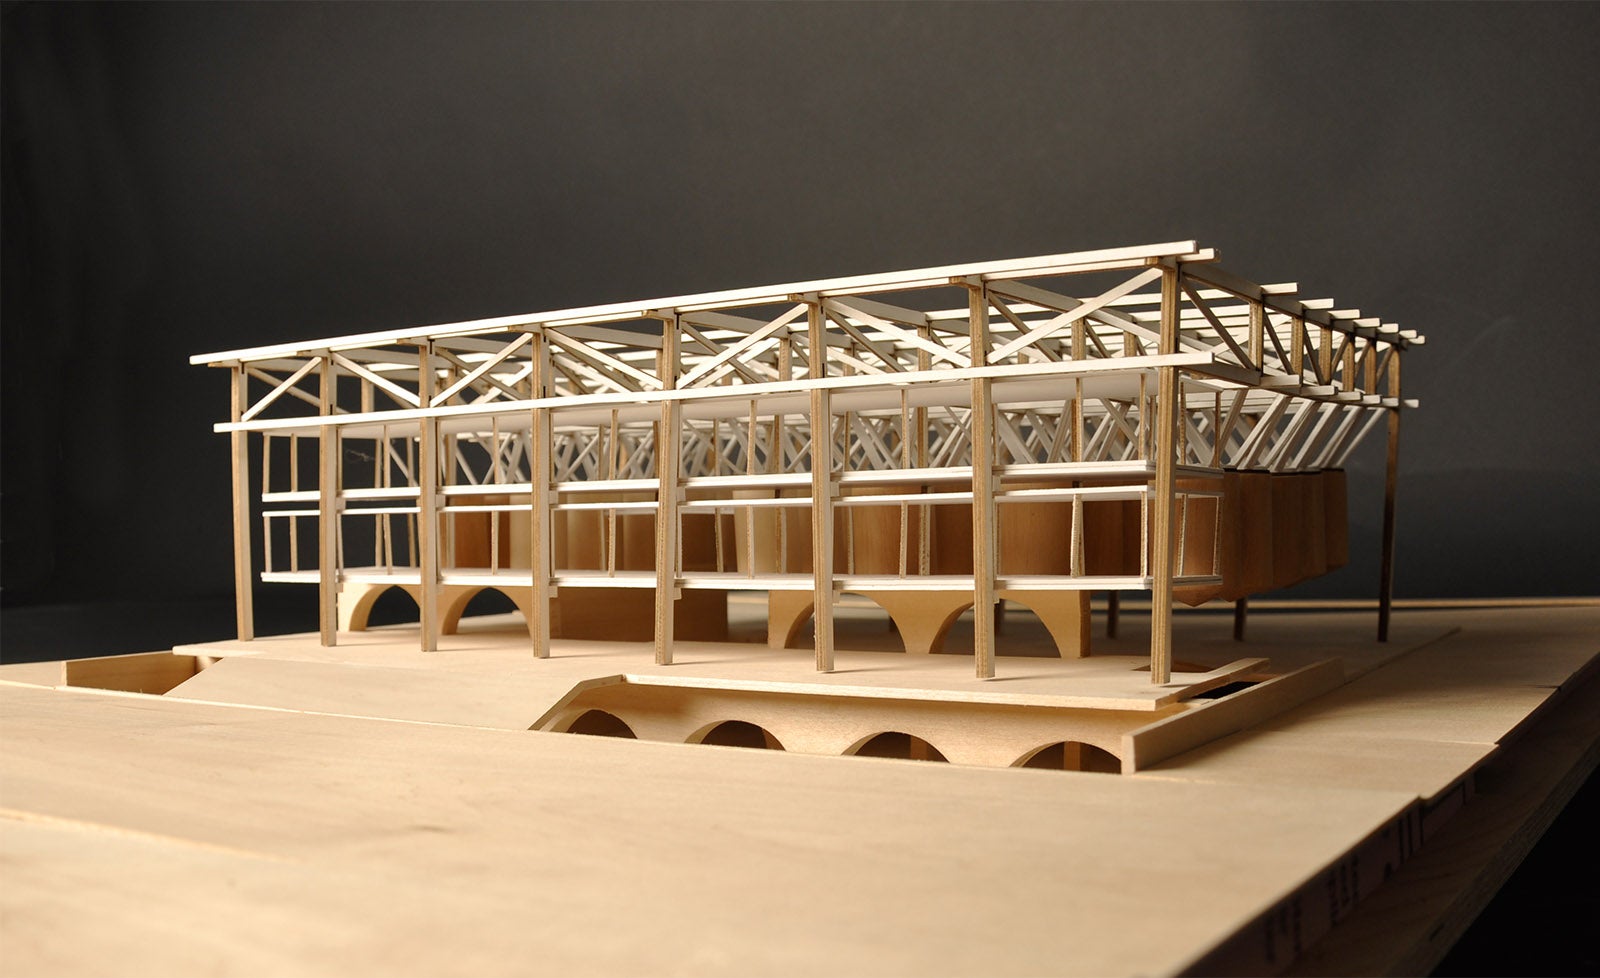 A detailed wooden model of a container storage facility from the exterior. Truses and support systesms are visible.